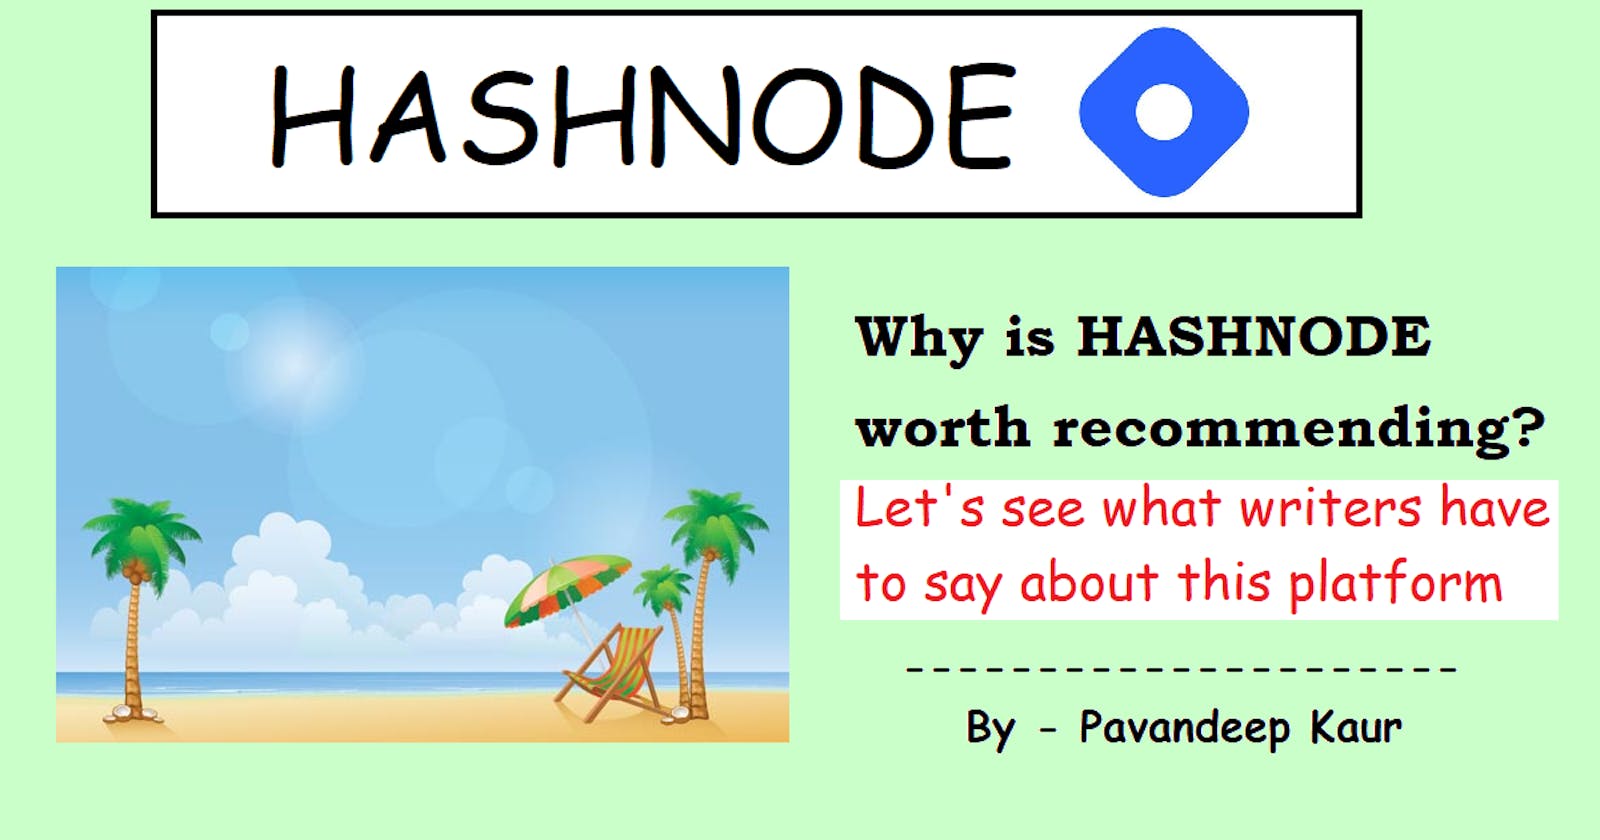 Why is HASHNODE worth recommending?